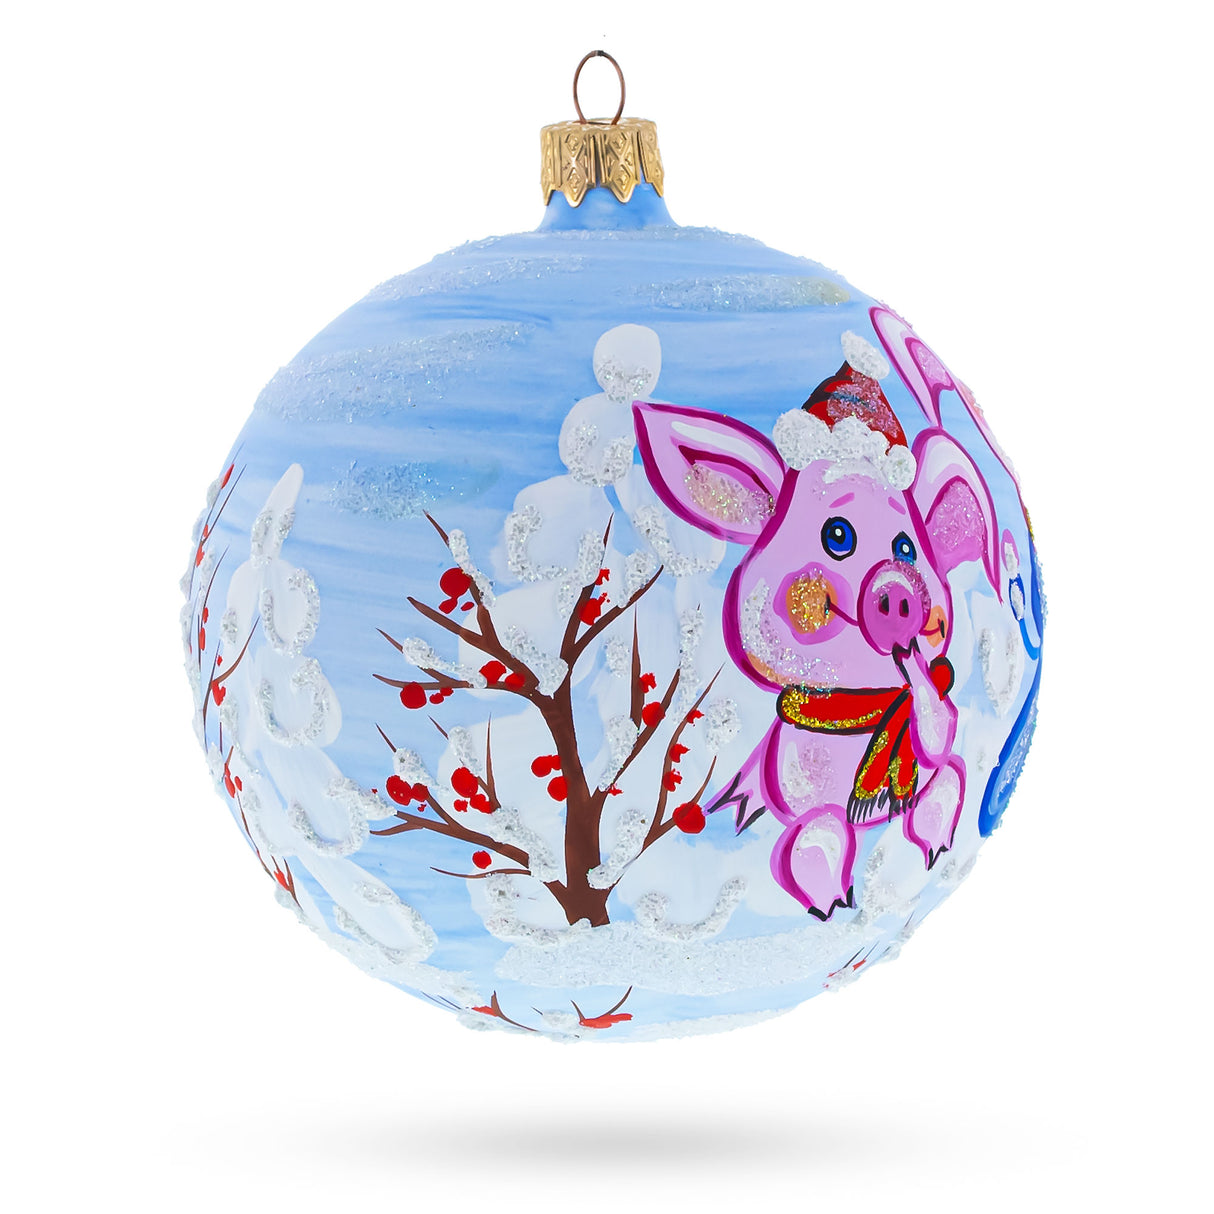 Buy Christmas Ornaments Animals Farm Animals Pigs by BestPysanky Online Gift Ship